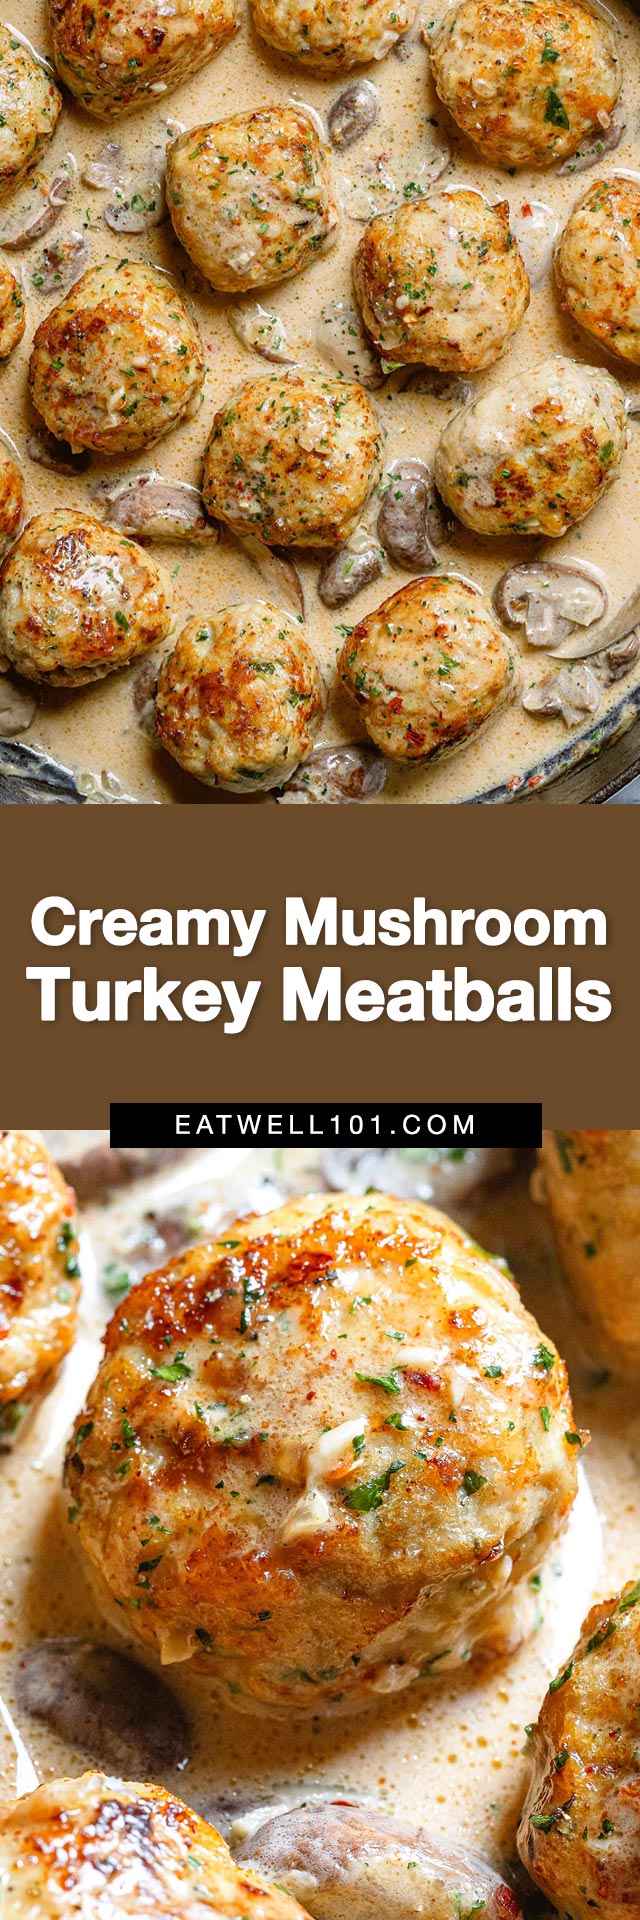 Creamy Mushrooms Turkey Meatballs Recipes - #turkey #meatballs #recipe #eatwell101 - Mushroom turkey meatballs are seared and simmered in a rich and delicious mushroom sauce.